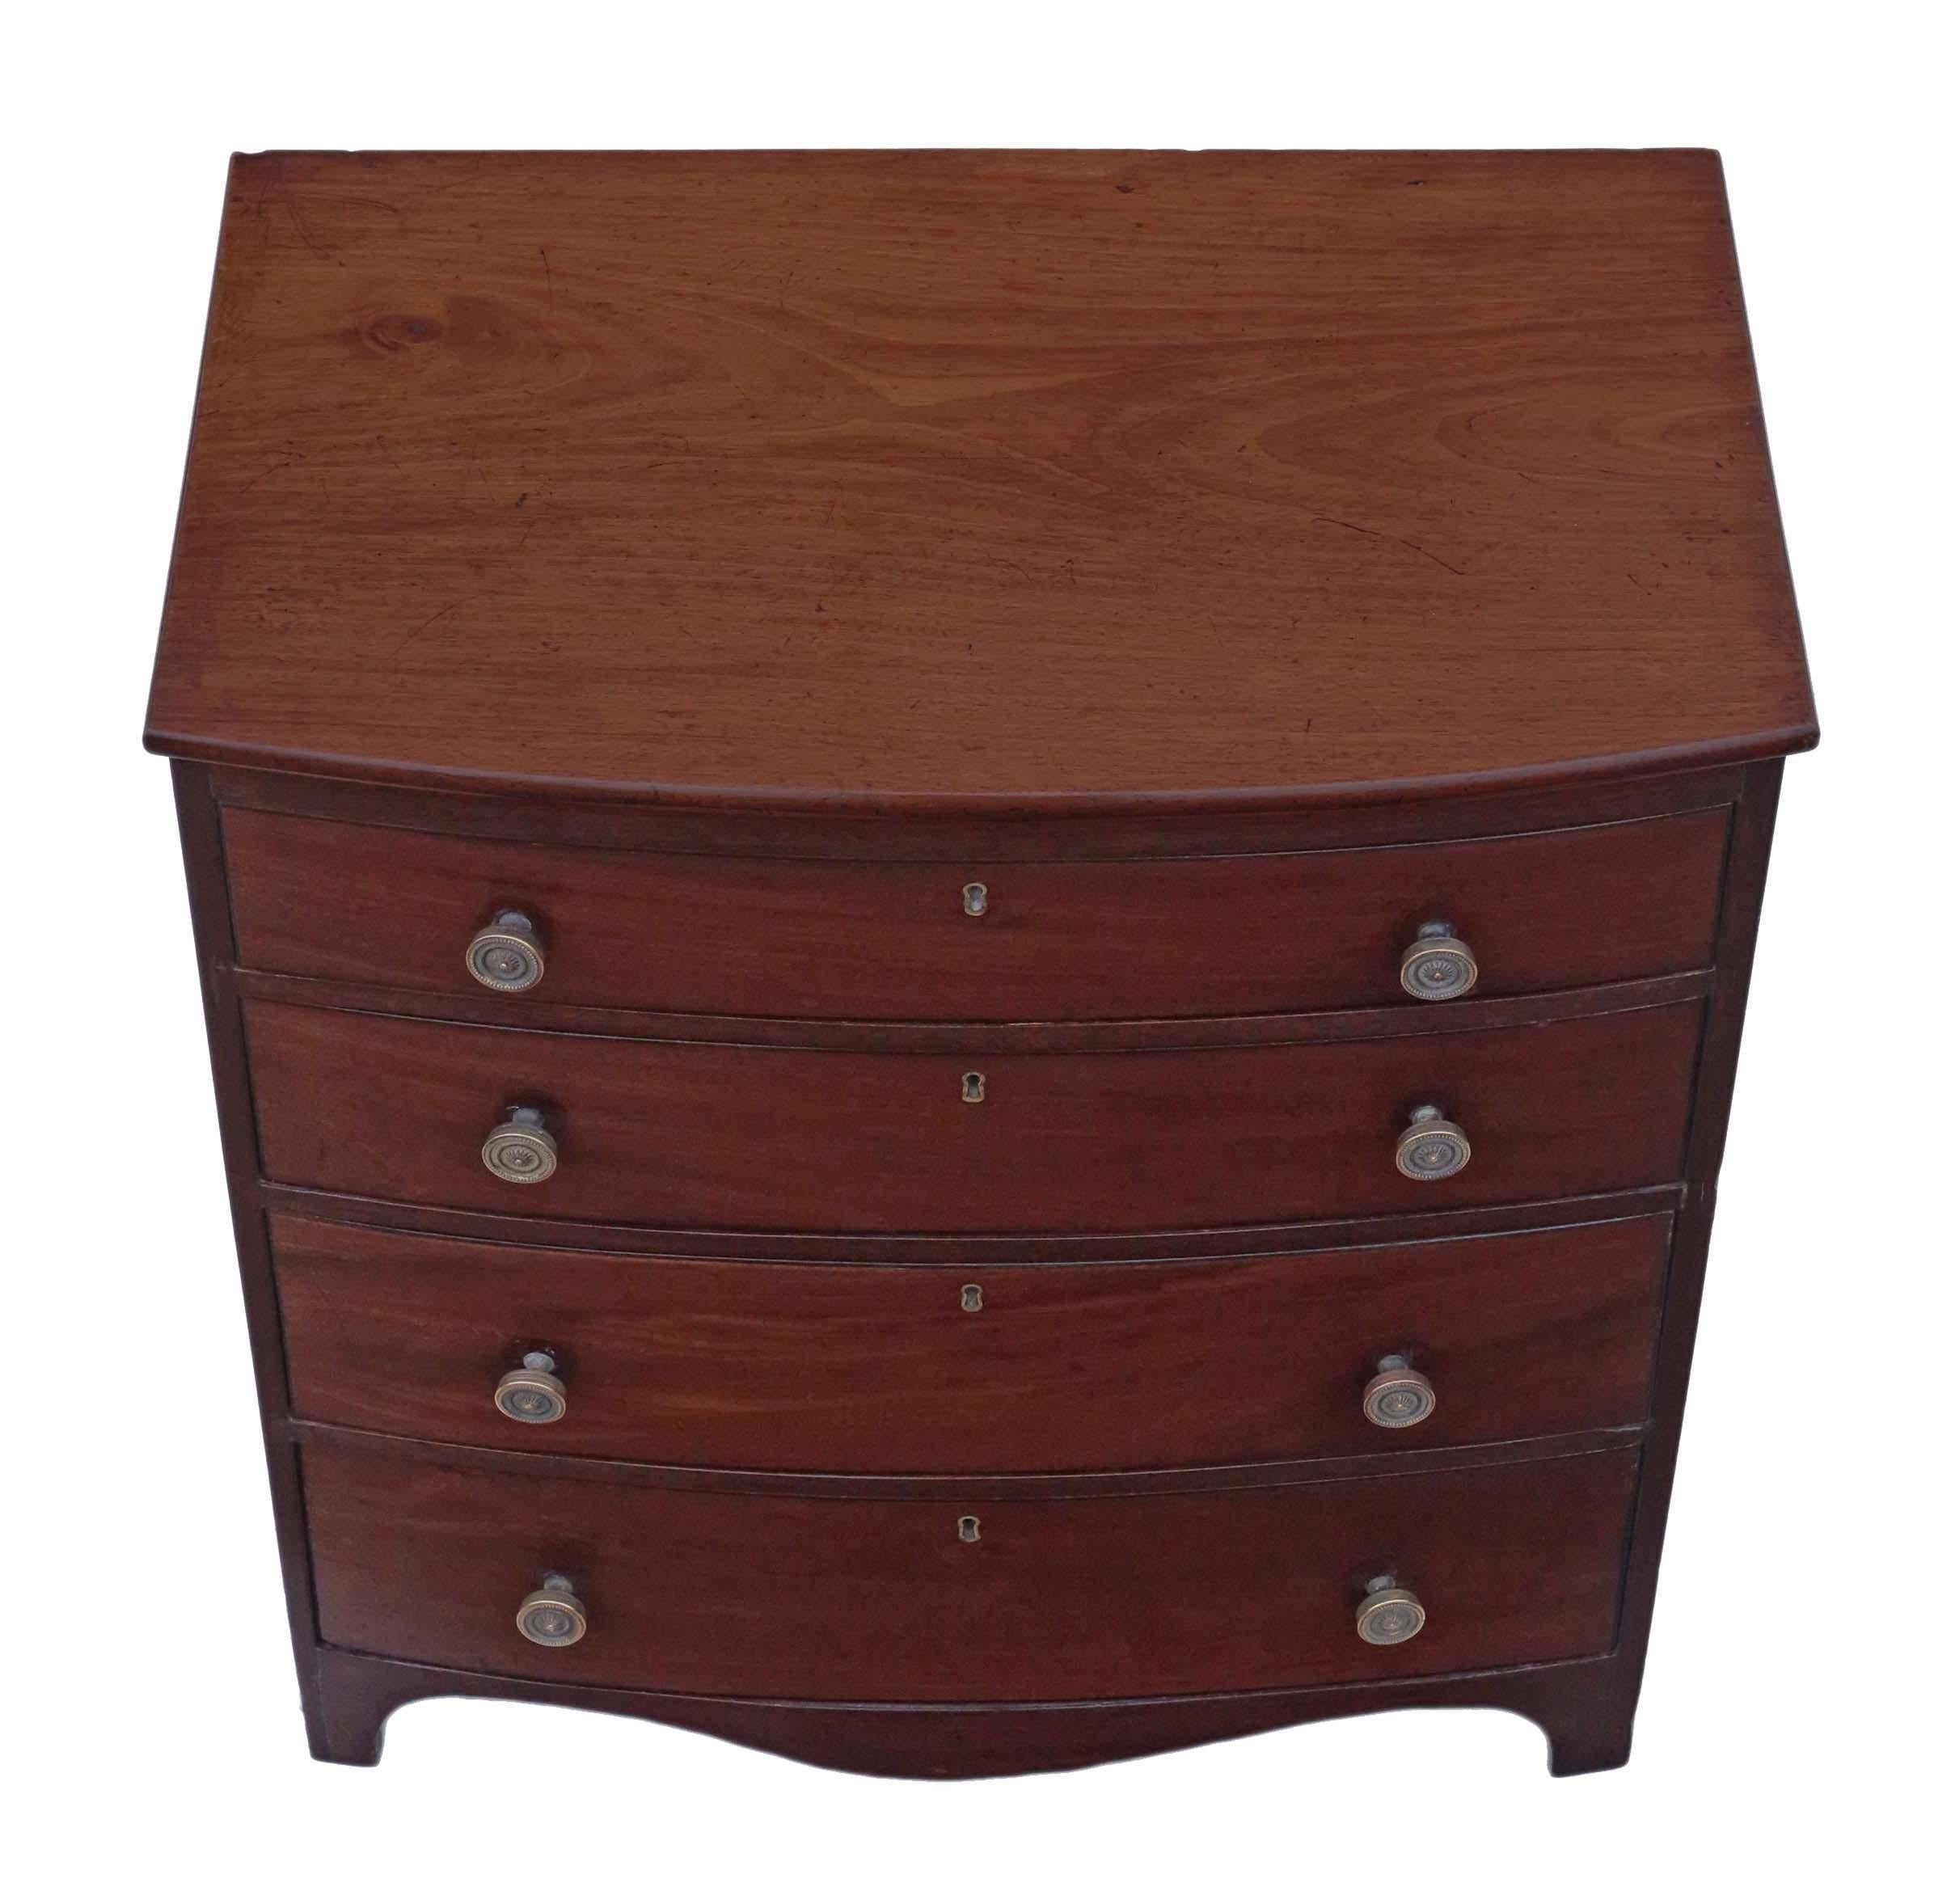 Antique Small Georgian 19th Century Mahogany Bow Front Chest of Drawers In Good Condition For Sale In Wisbech, Cambridgeshire